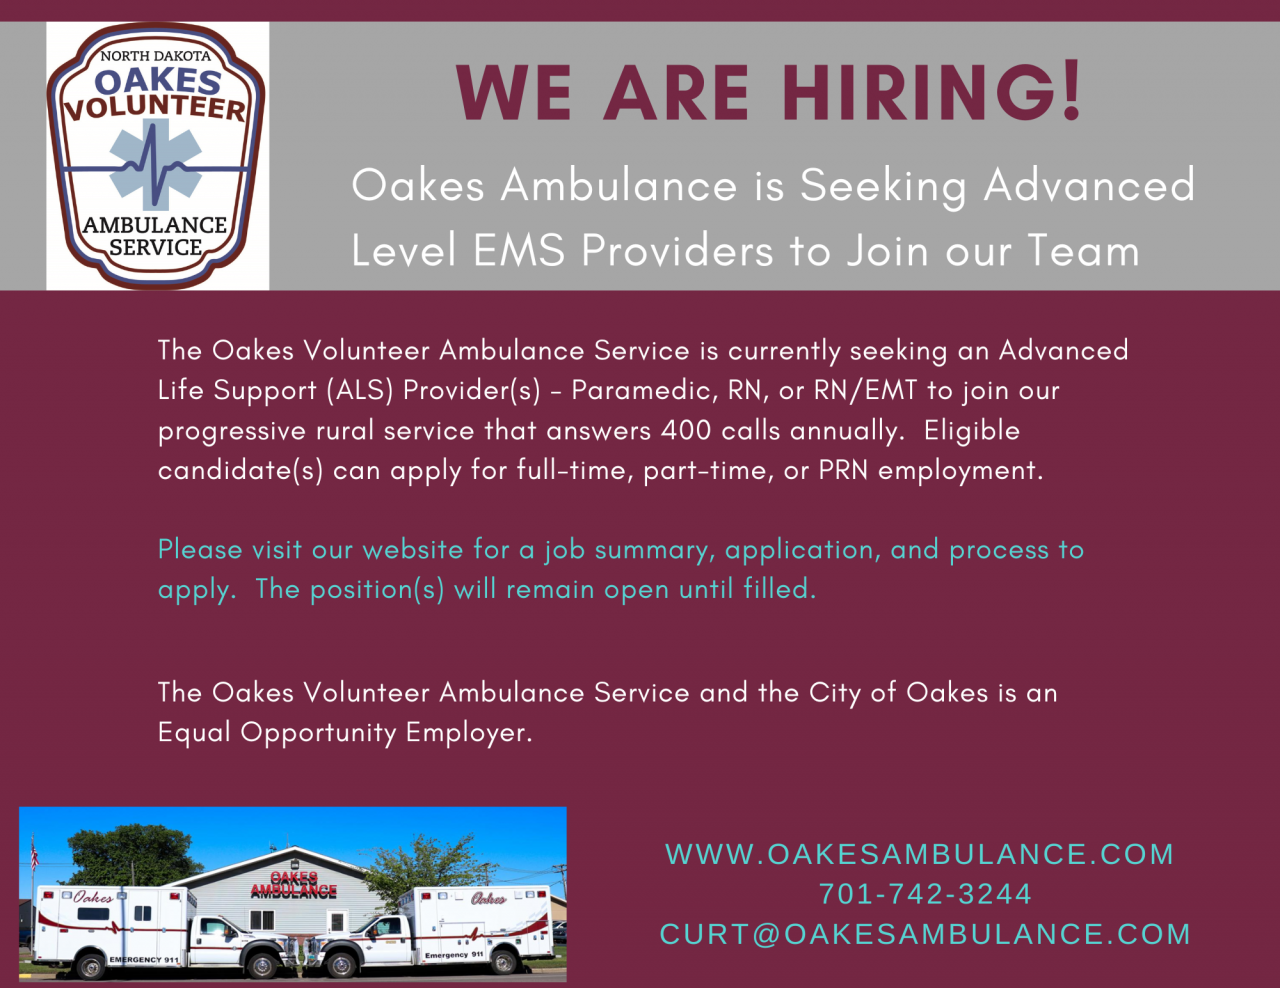 Advanced Life Support Providers - Paramedic, RN or RN/EMT  at Oakes Volunteer Ambulance Service